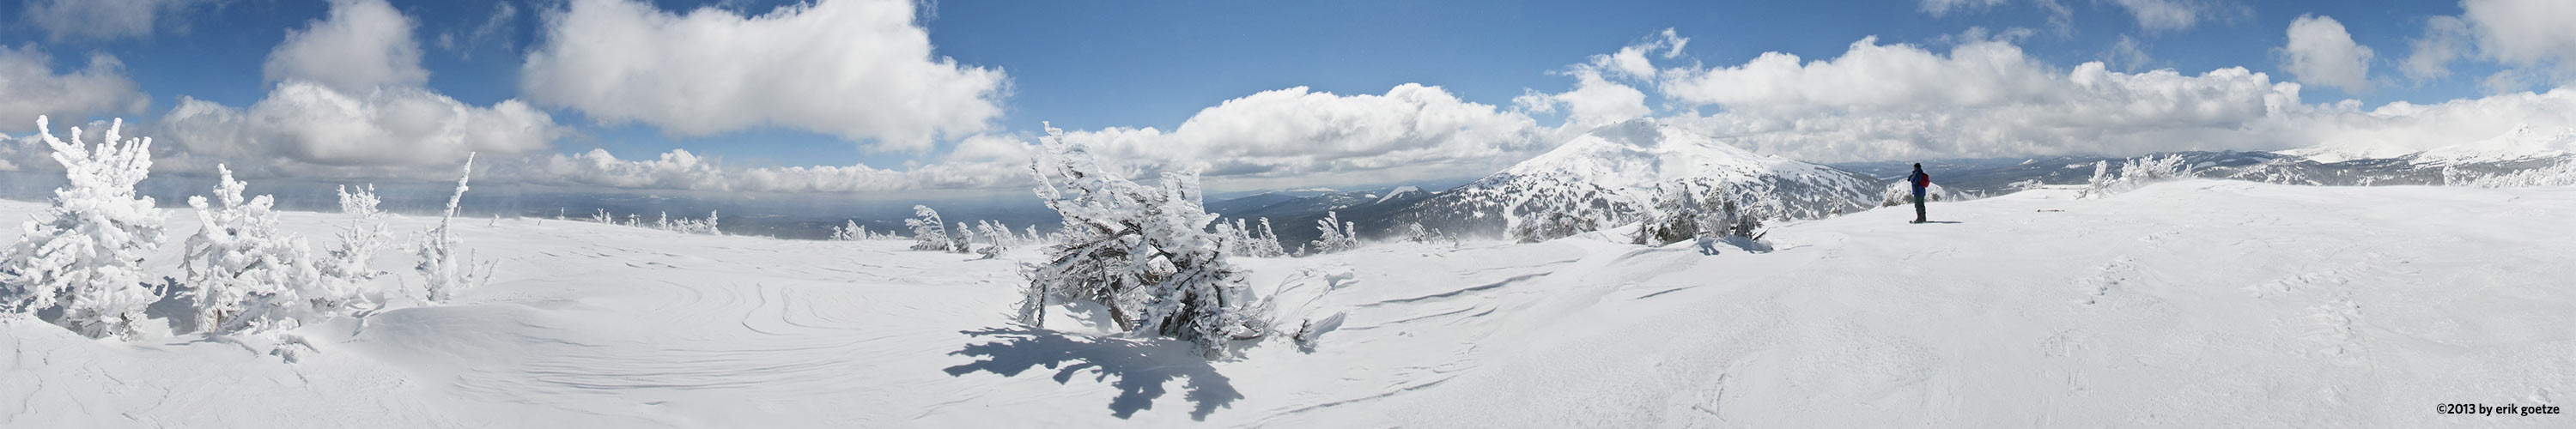 View of Mt. Bachelor from the top of Tumalo Mtn, Oregon